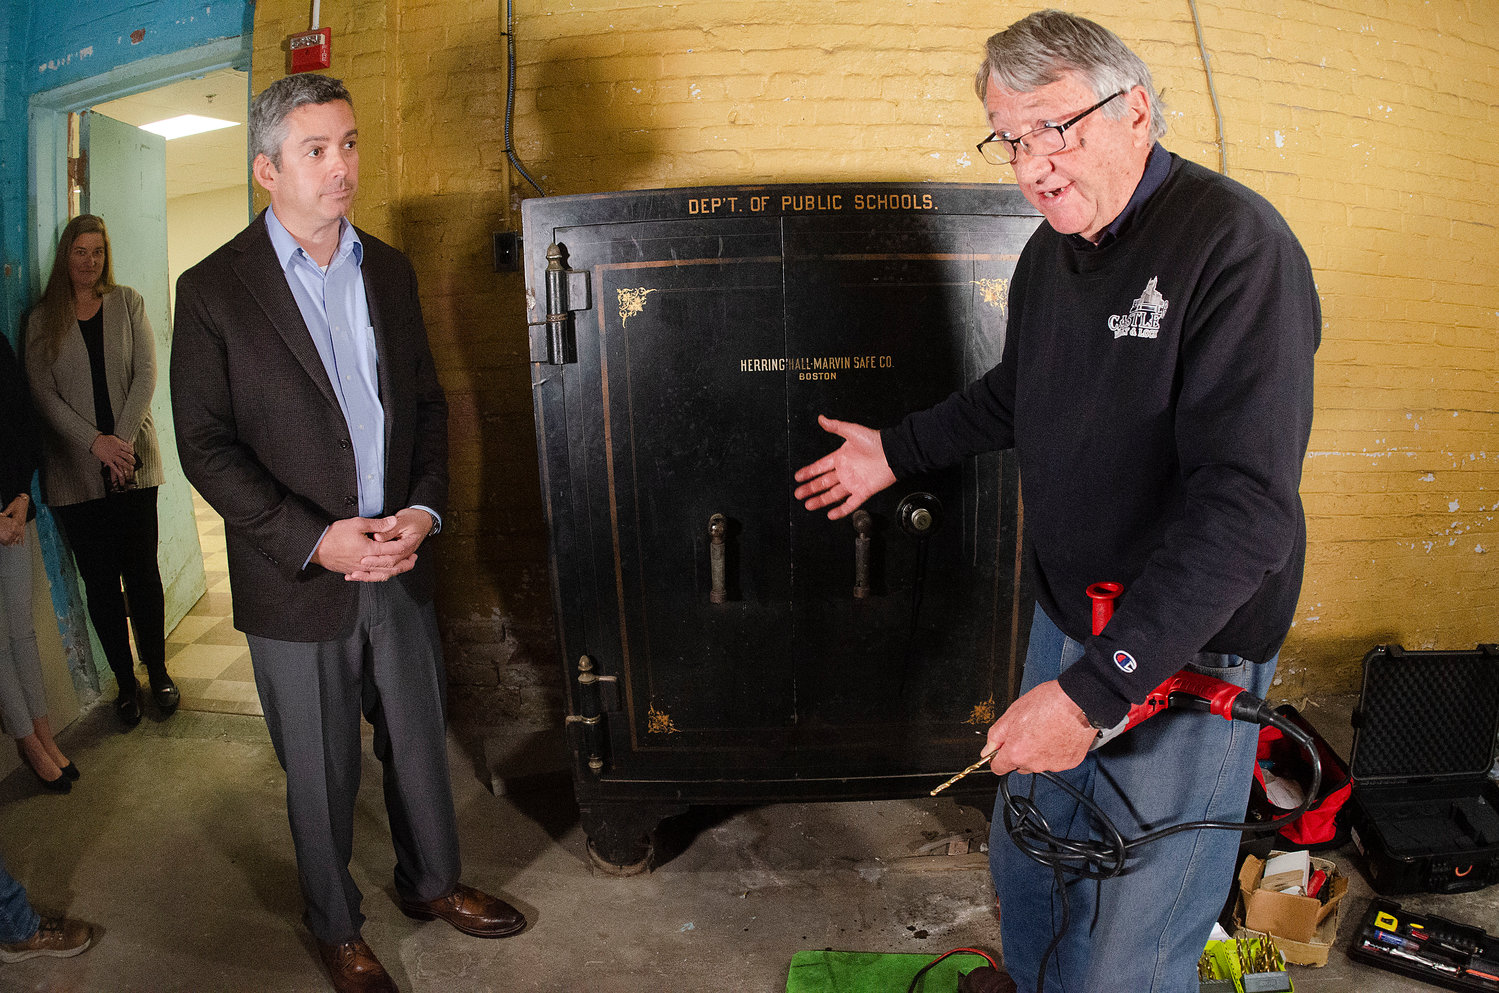 Town administrator Steve Contente looks on as professional safecracker  Francesco Therisod  explains the procedure of opening the safe to a live audience.